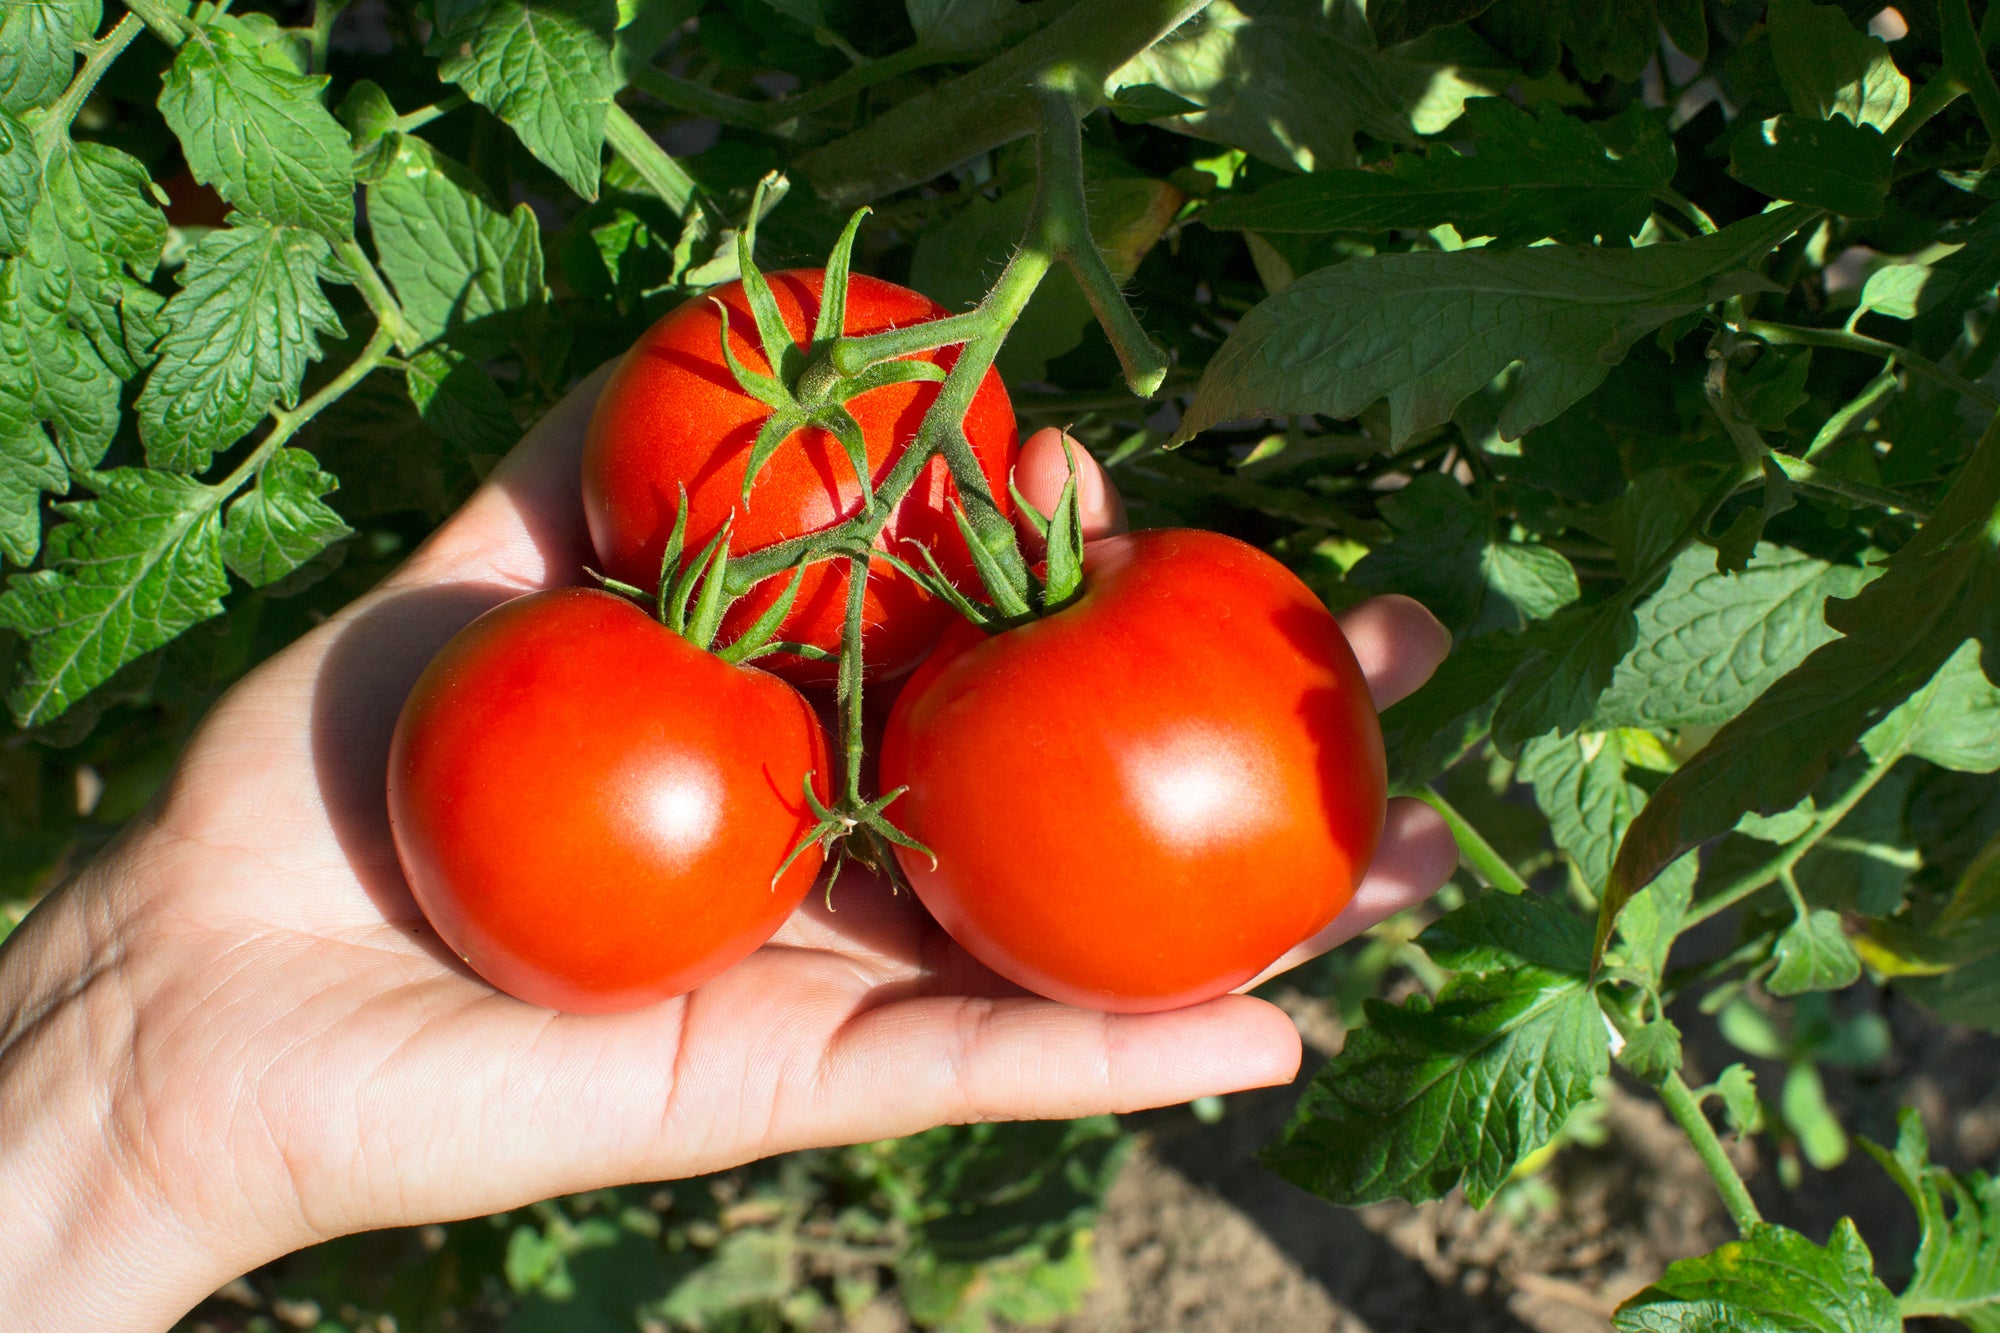 Getting Started Growing Tomatoes